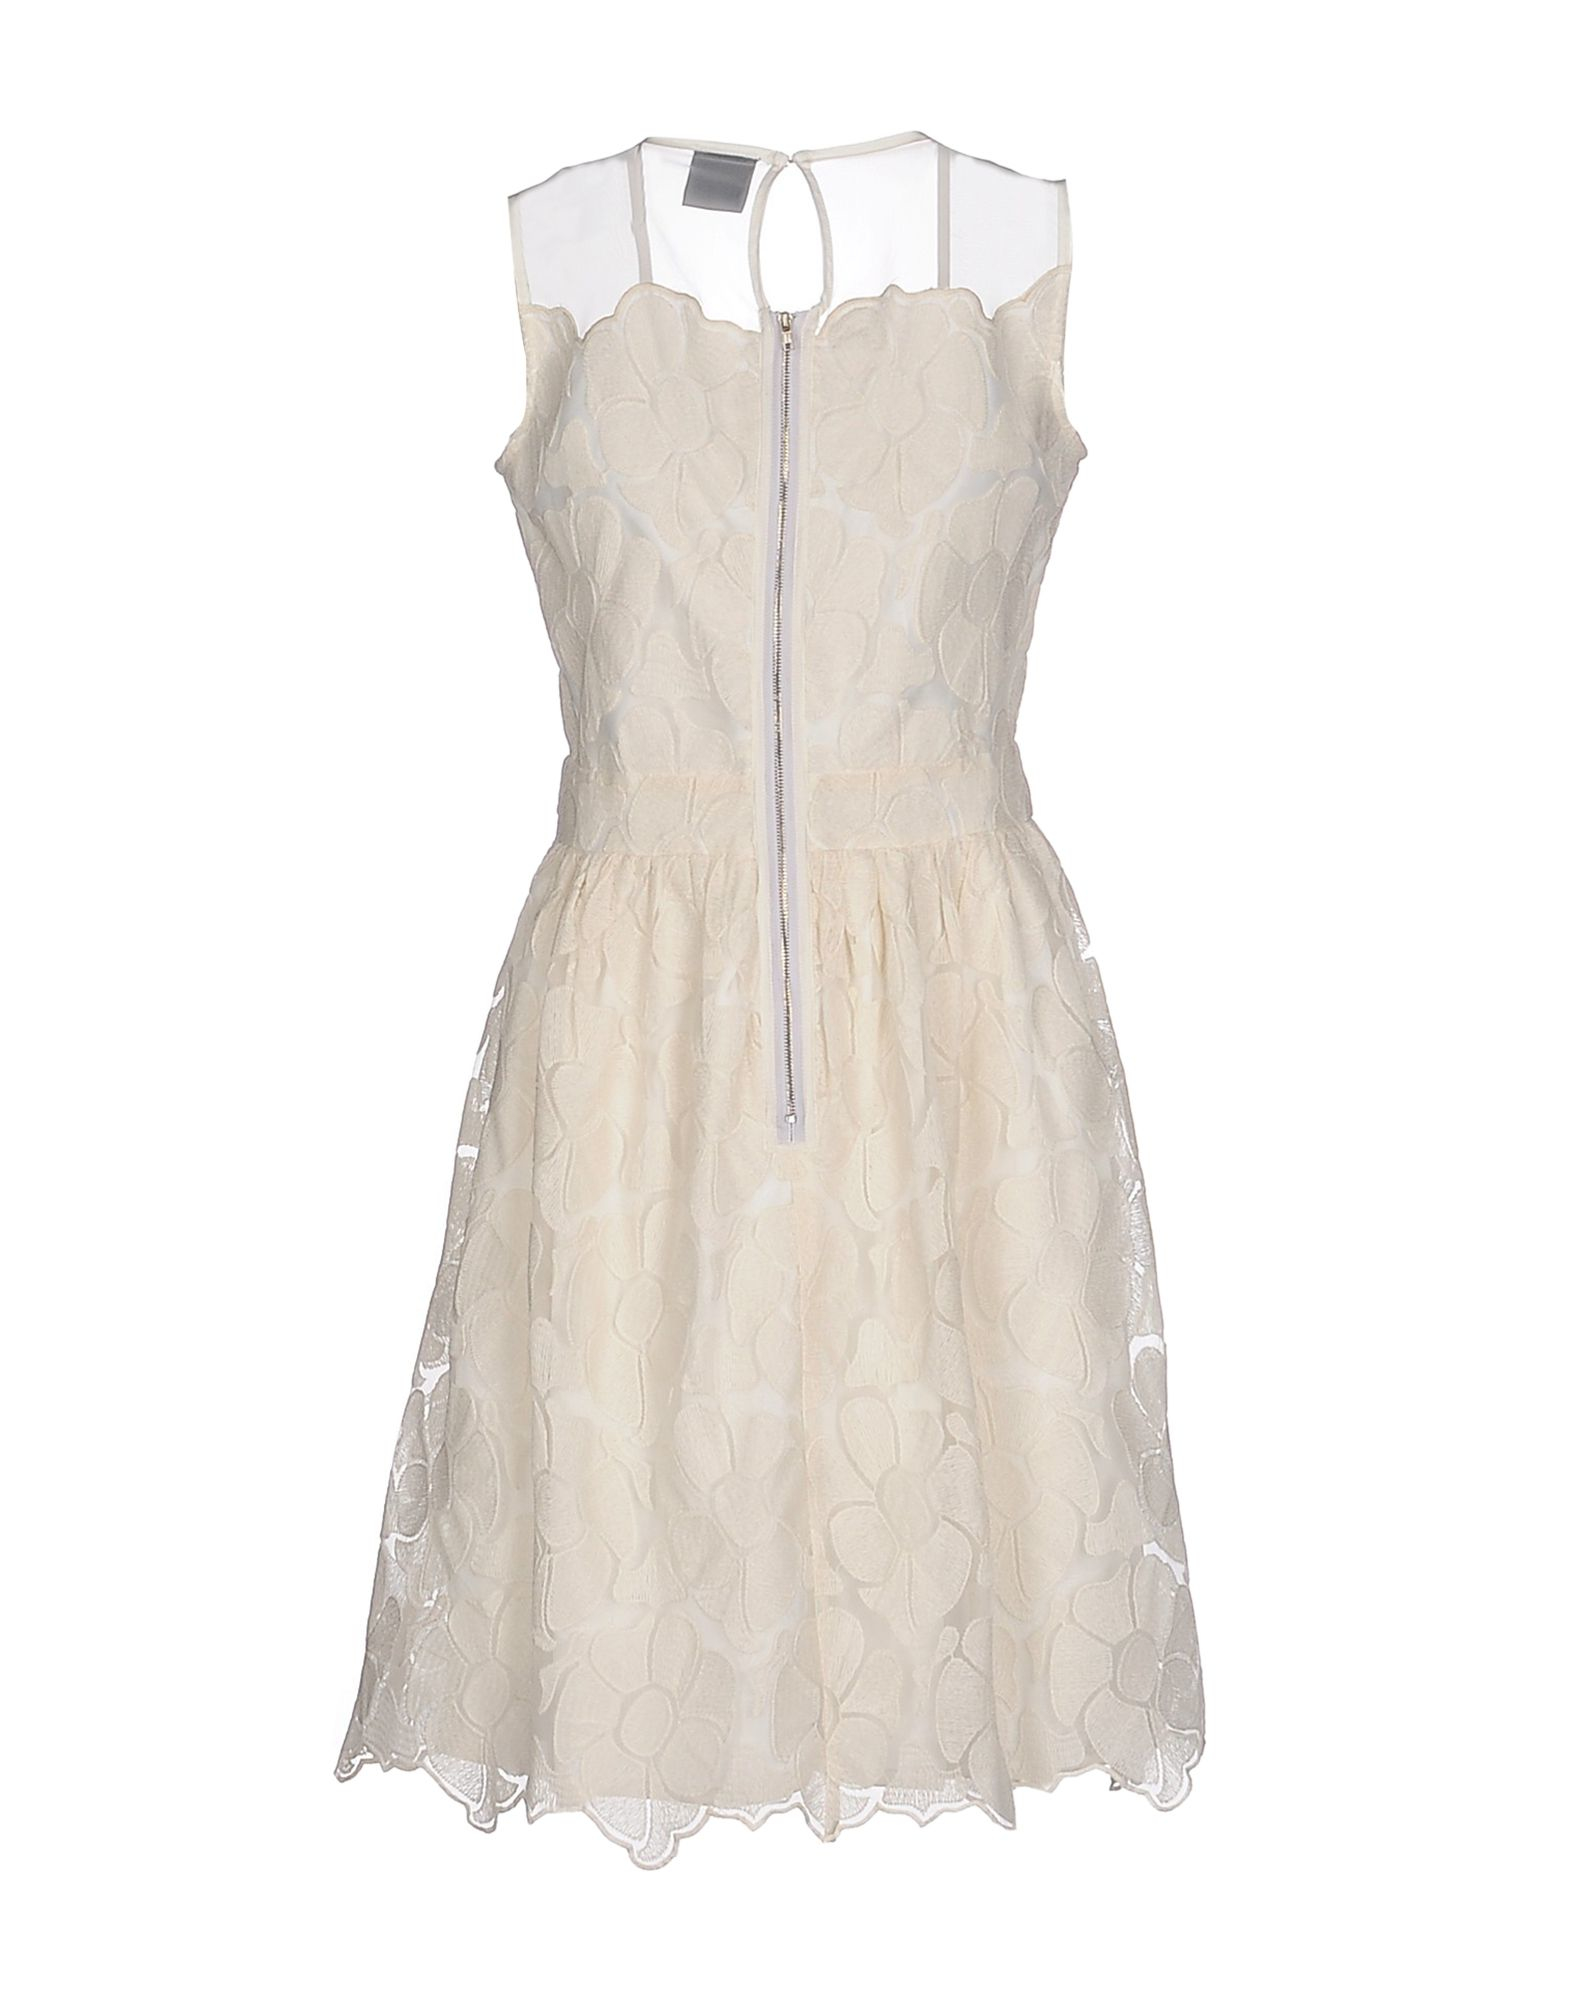 Pf Paola Frani Synthetic Short Dress in Natural - Lyst